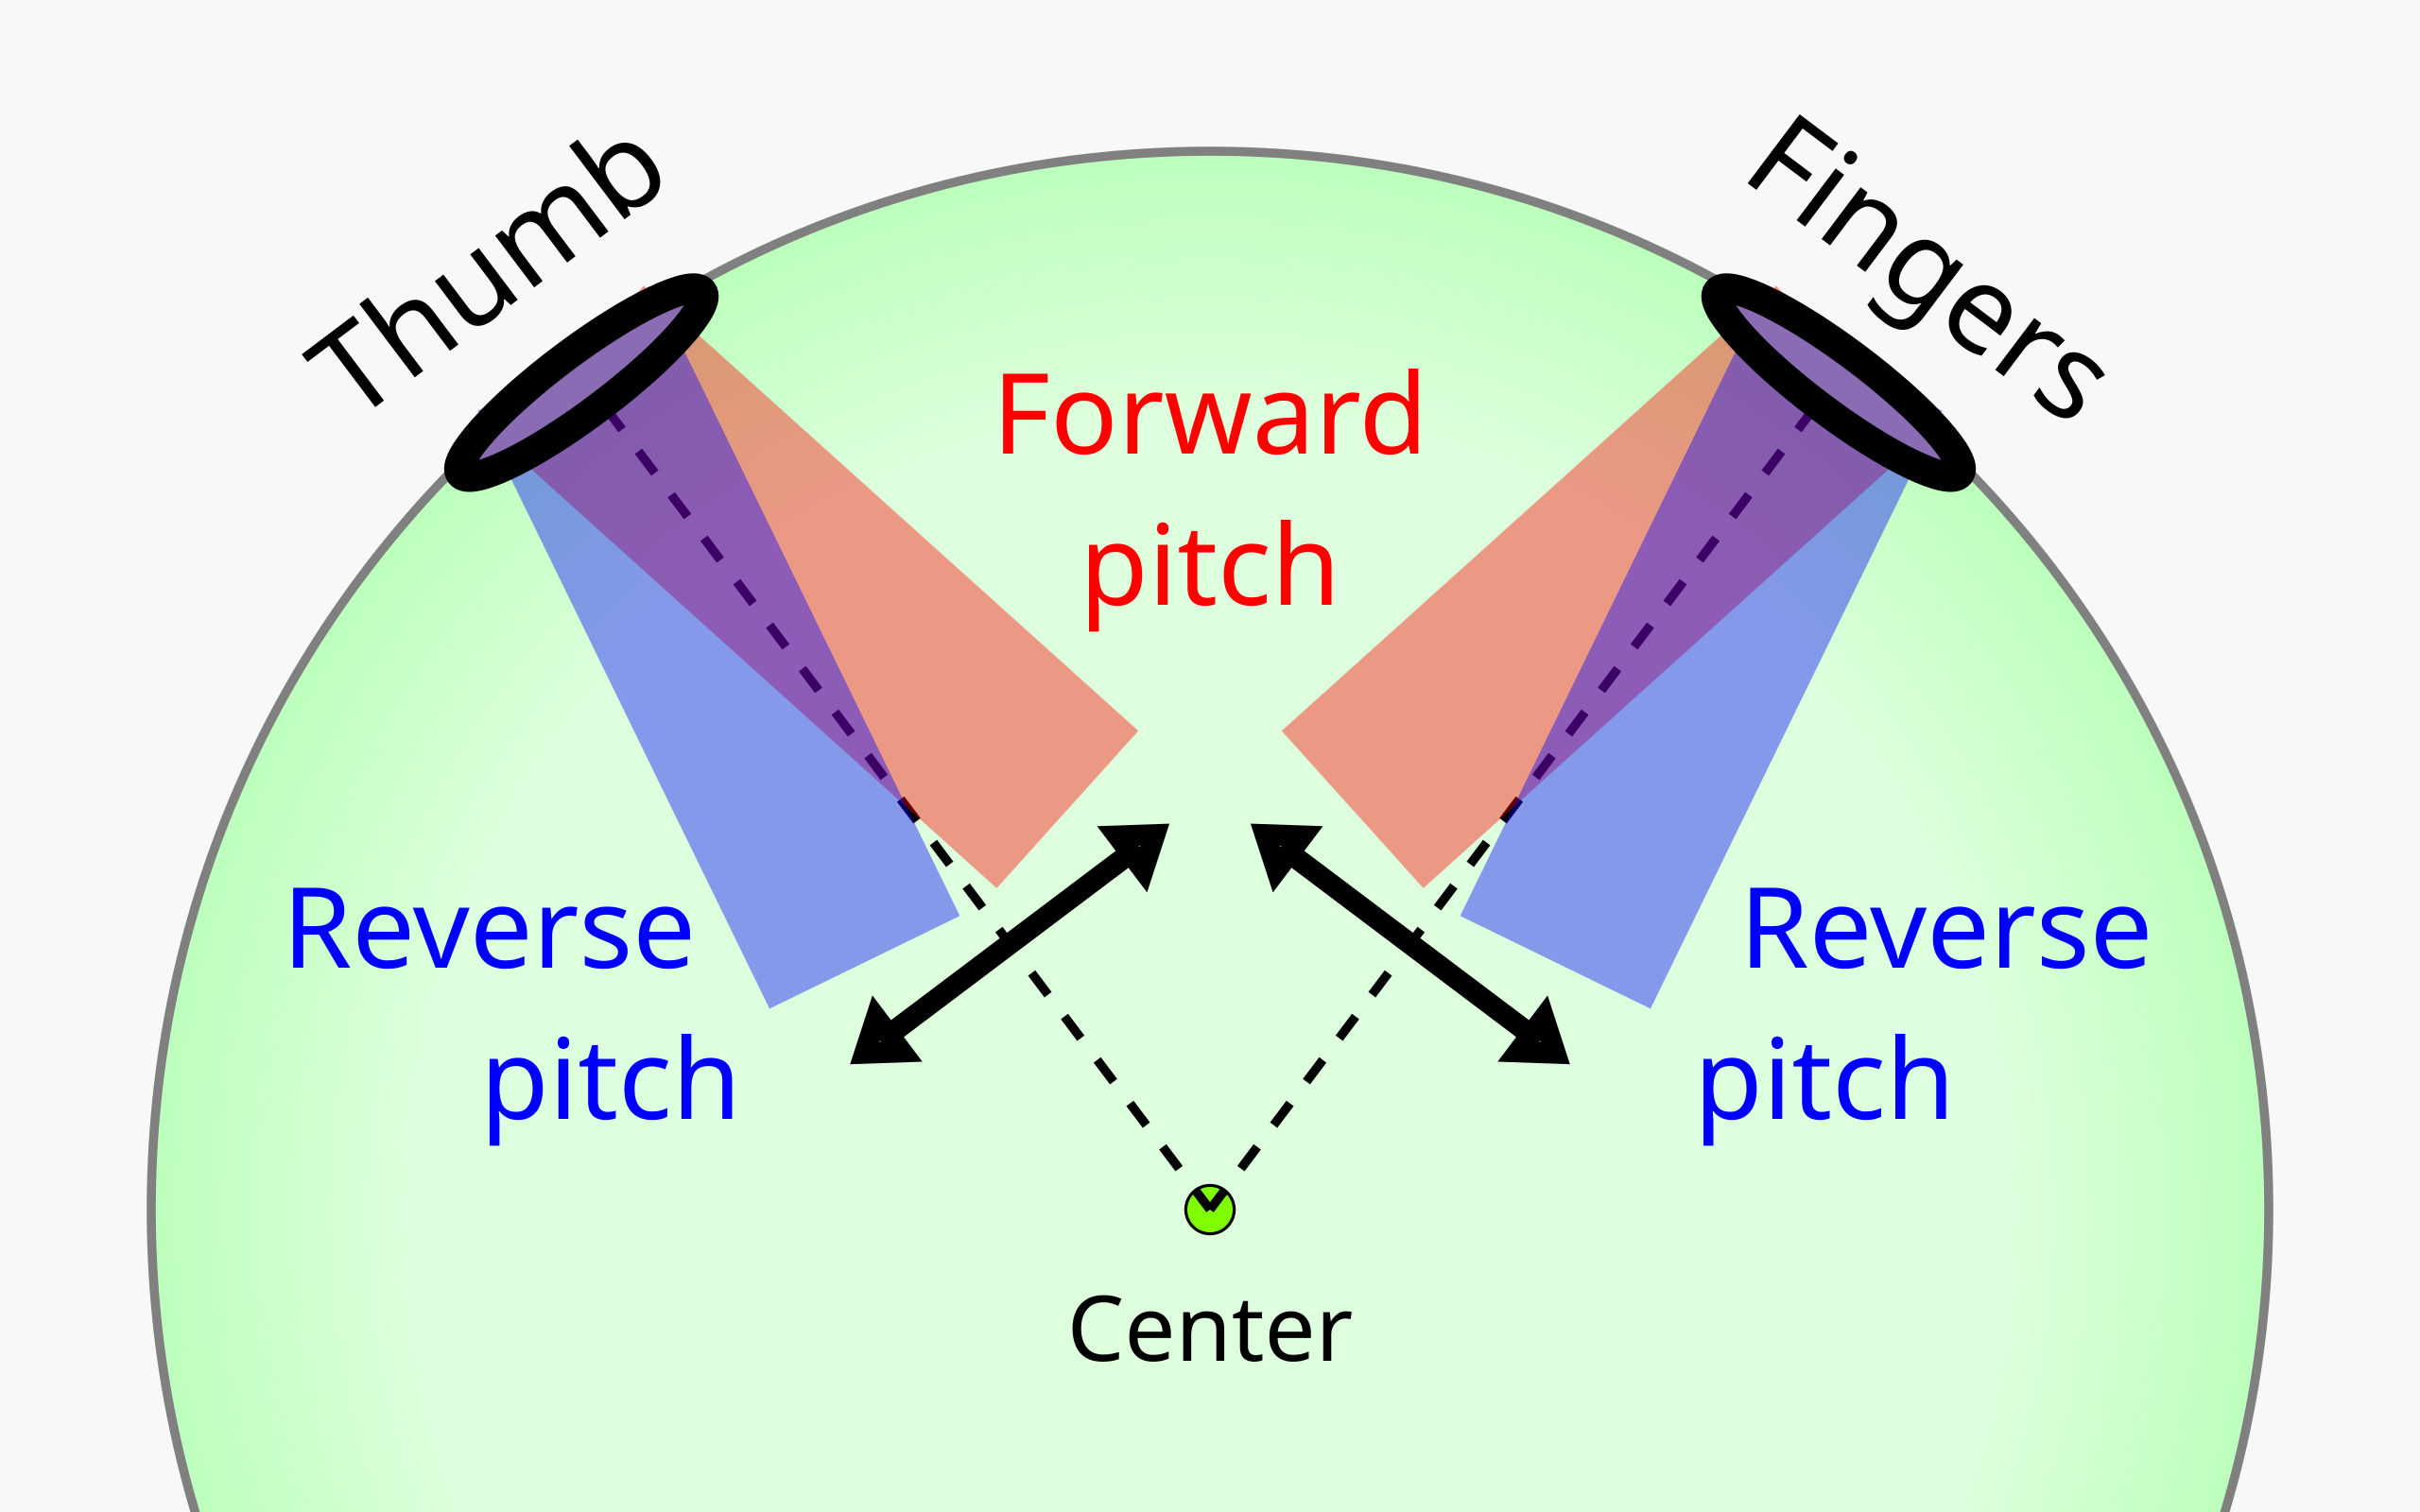 https://upload.wikimedia.org/wikipedia/commons/thumb/6/64/20210729_Bowling_ball_-_finger_and_thumb_hole_pitch_angles.svg/2560px-20210729_Bowling_ball_-_finger_and_thumb_hole_pitch_angles.svg.png